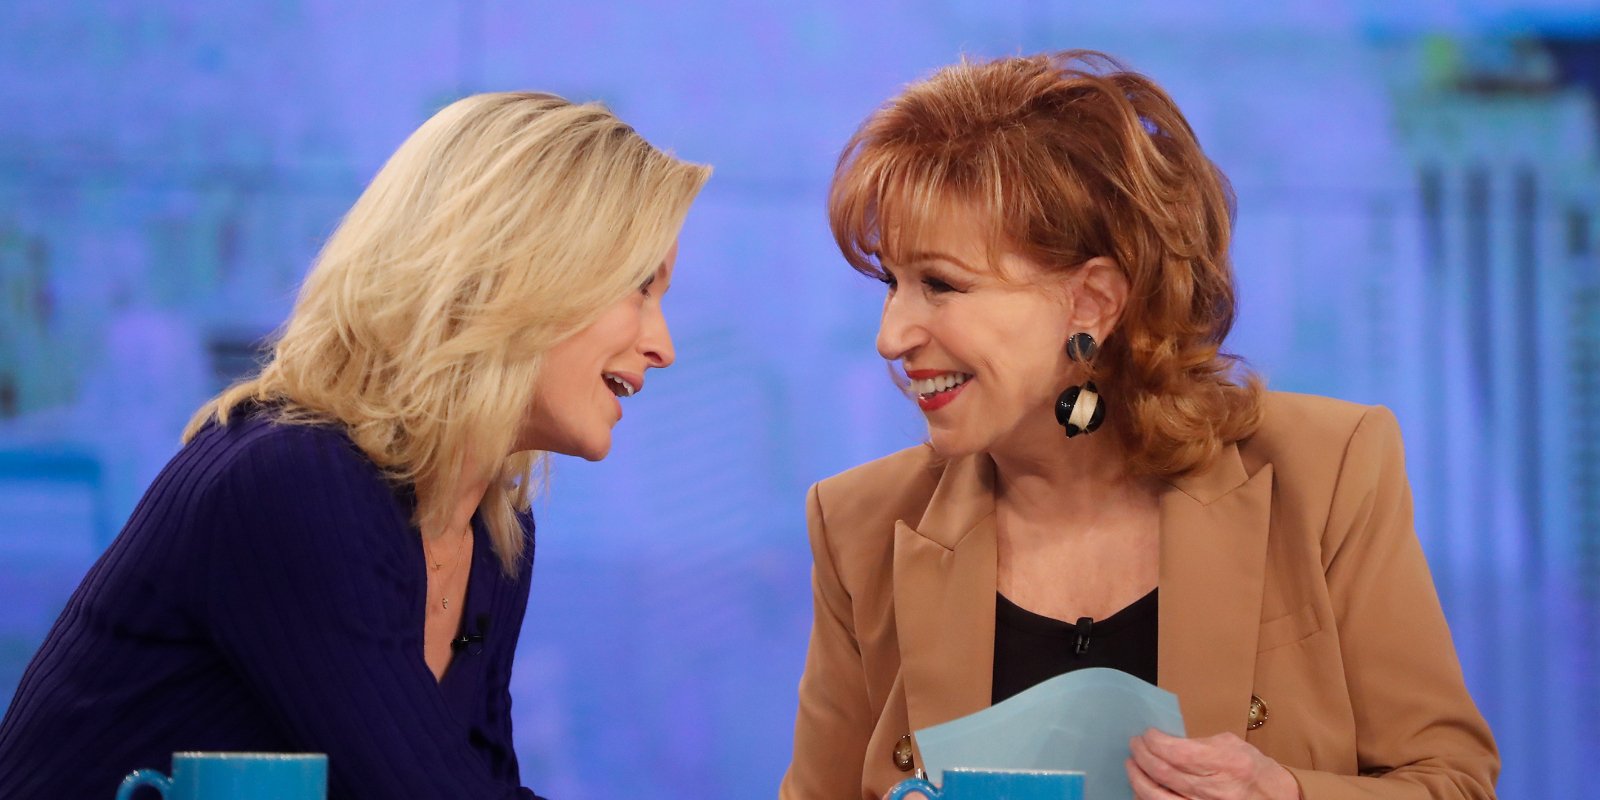 Sarah Haines and Joy Behar on the set of 'The View.'